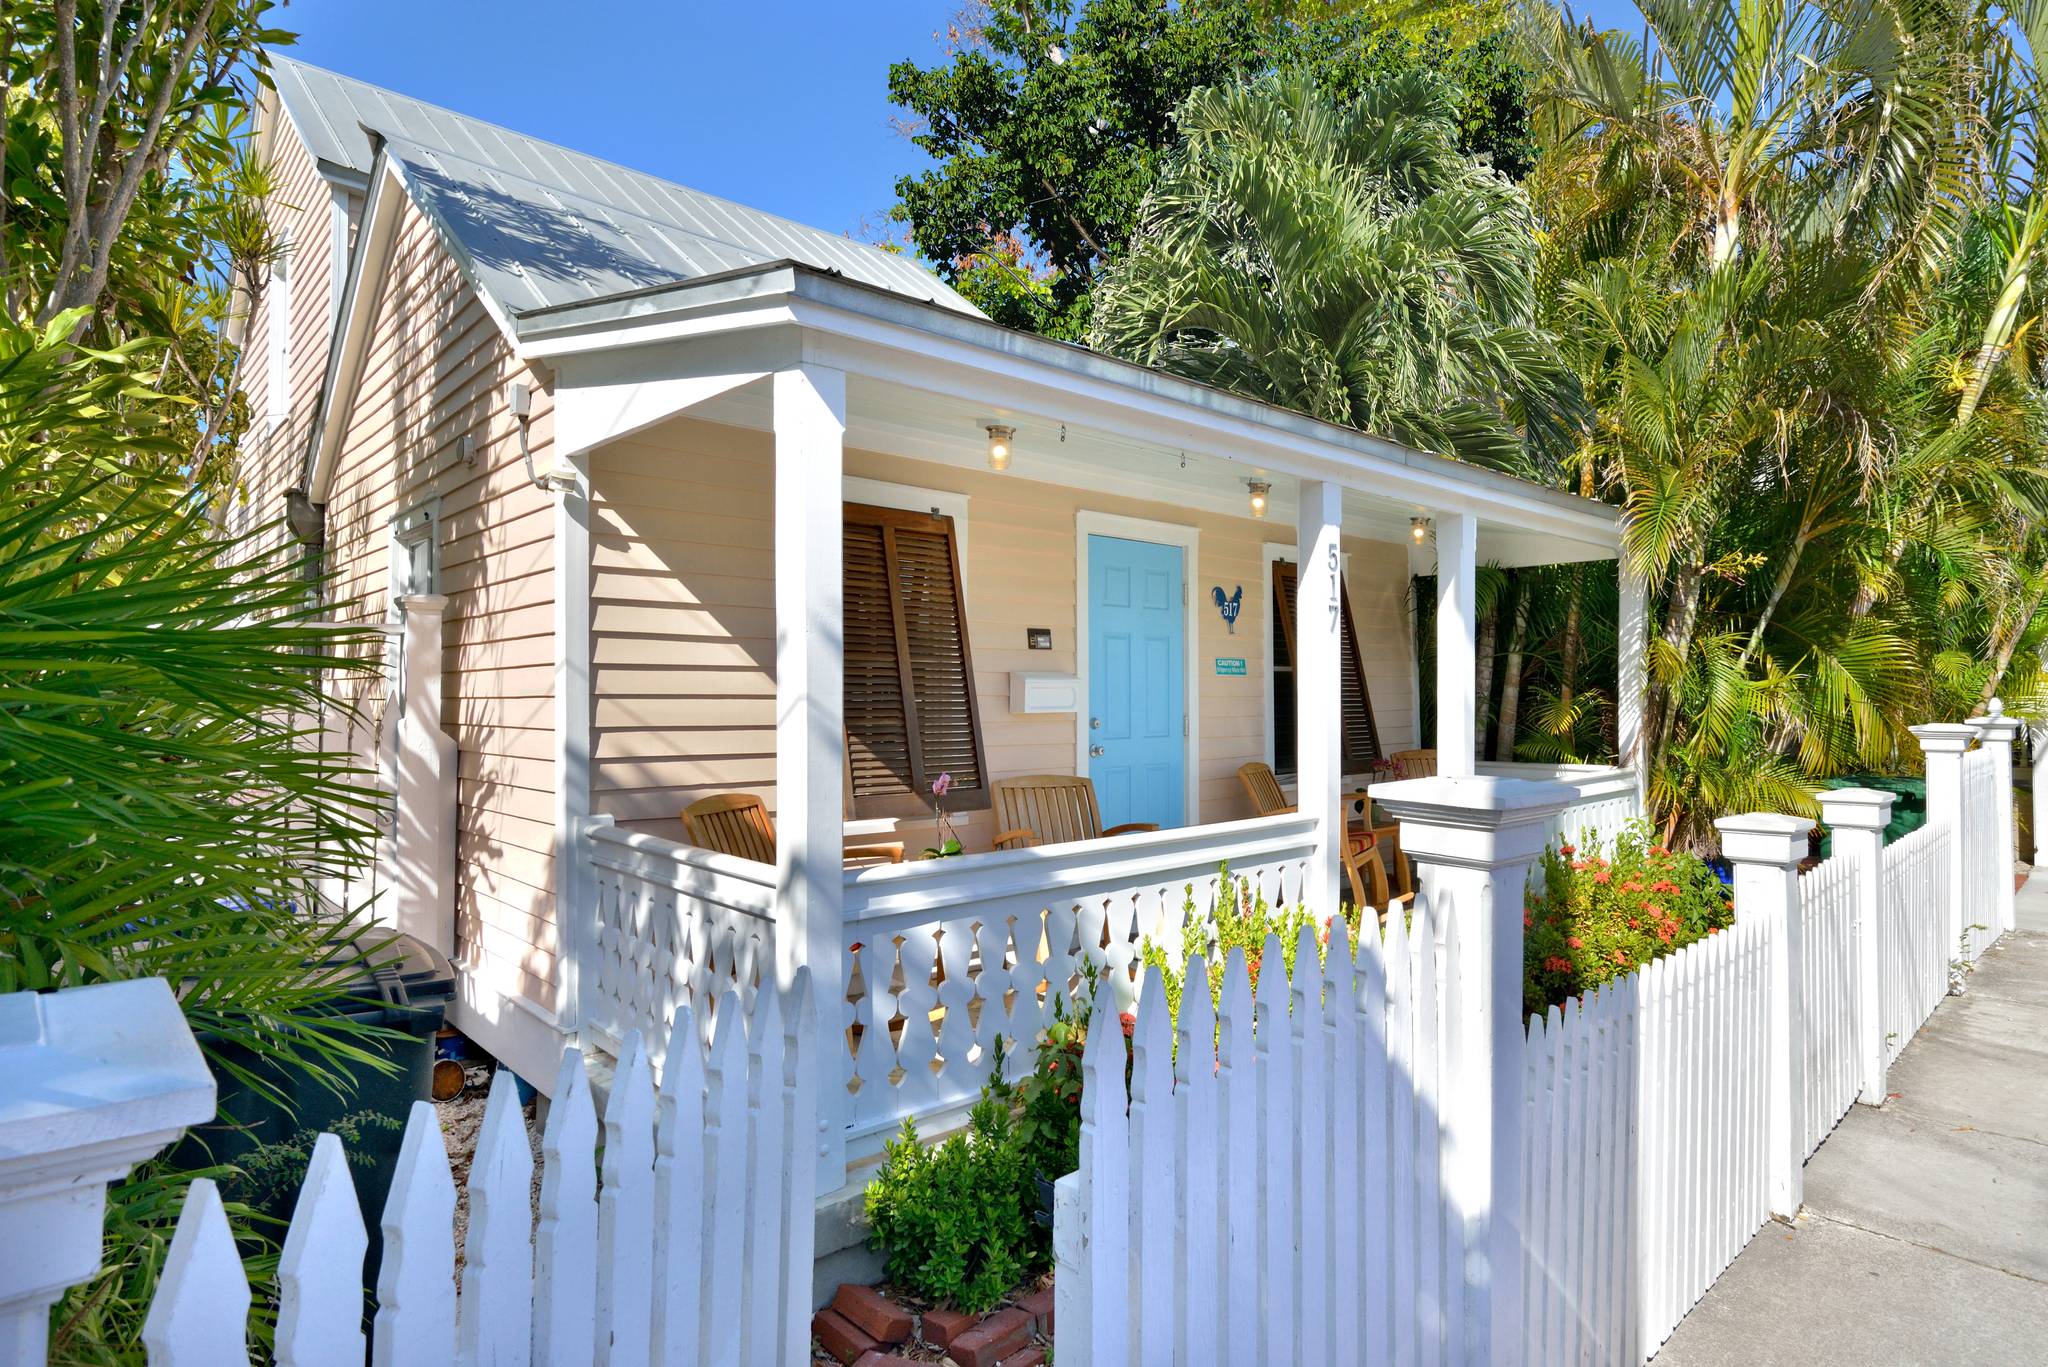 SUNKISSED - Livin' off Duval! | Best of Key West Rentals